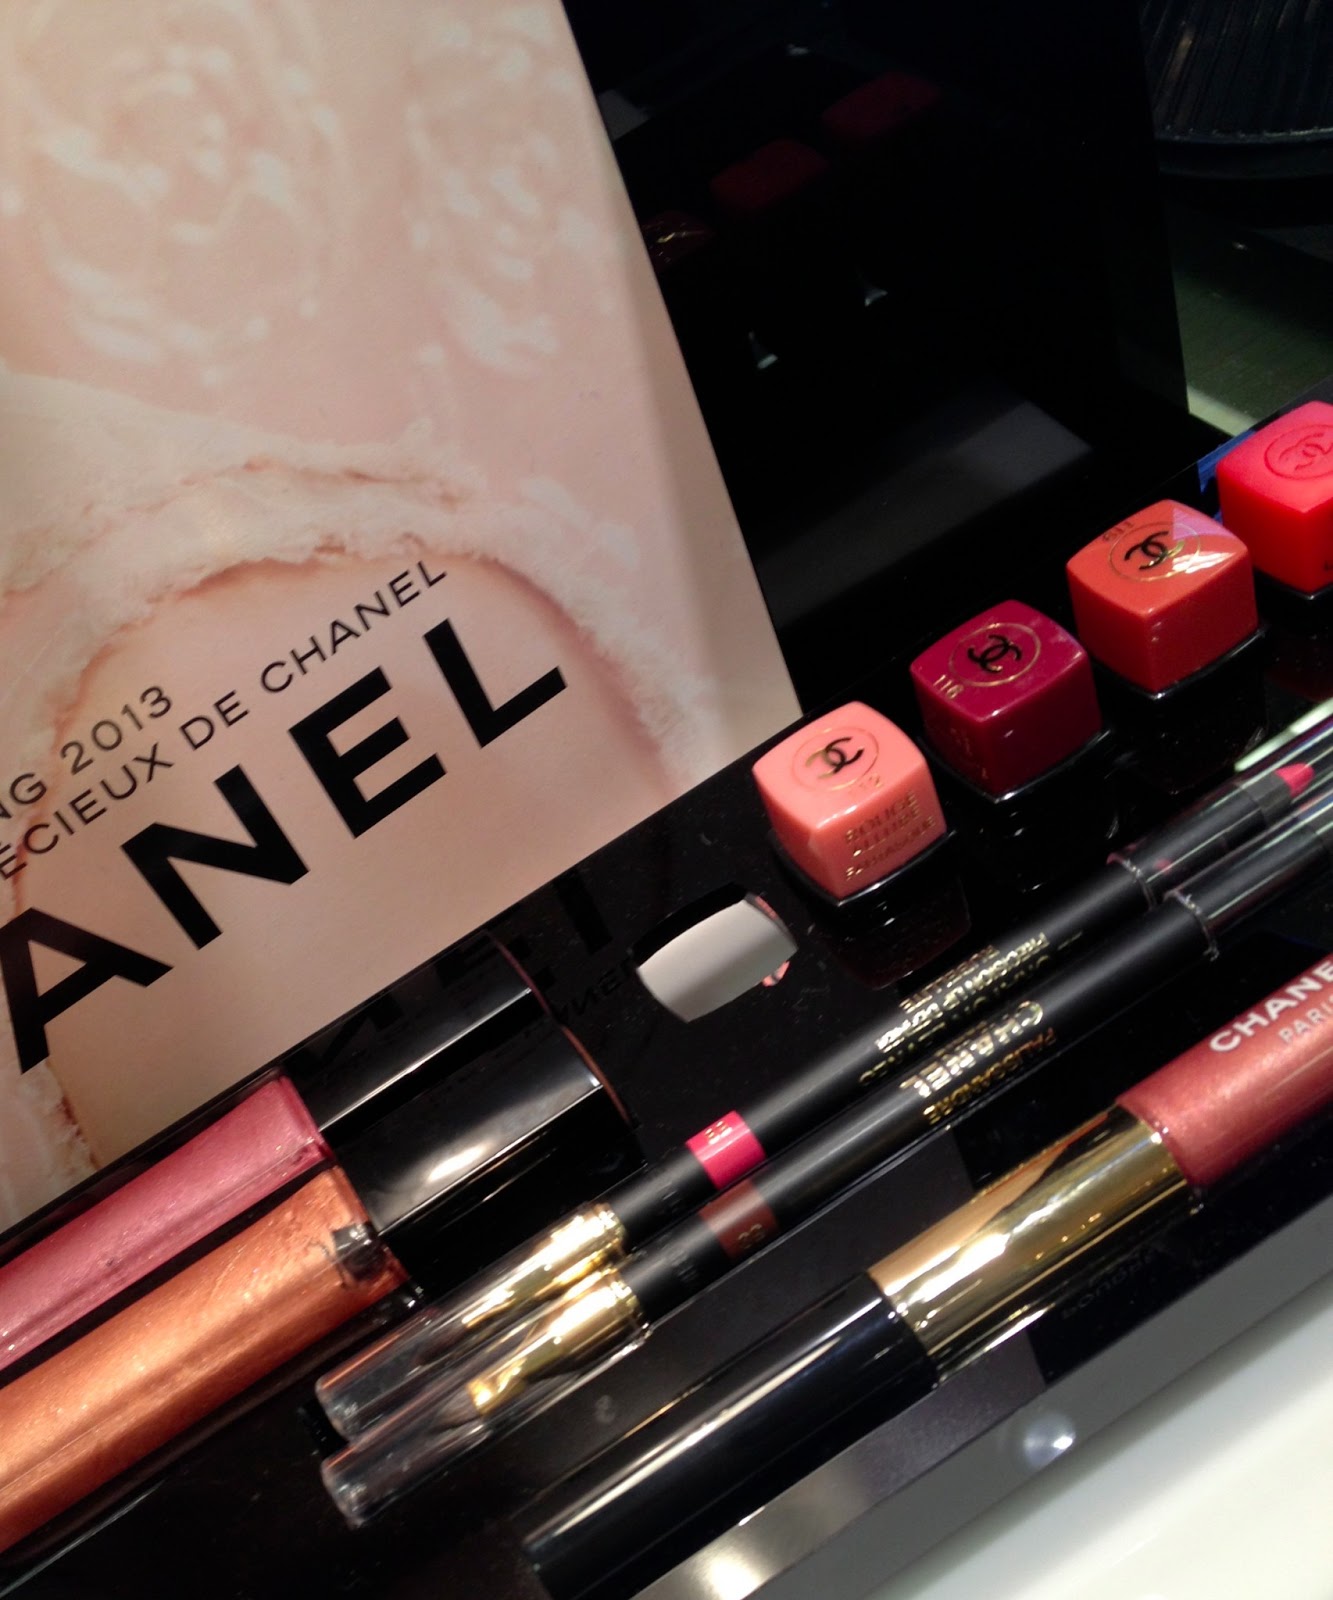 the raeviewer - a premier blog for skin care and cosmetics from an  esthetician's point of view: Chanel Spring 2013 Printemps Precieux Makeup  Collection Review, Photos, Swatches + TUTORIAL